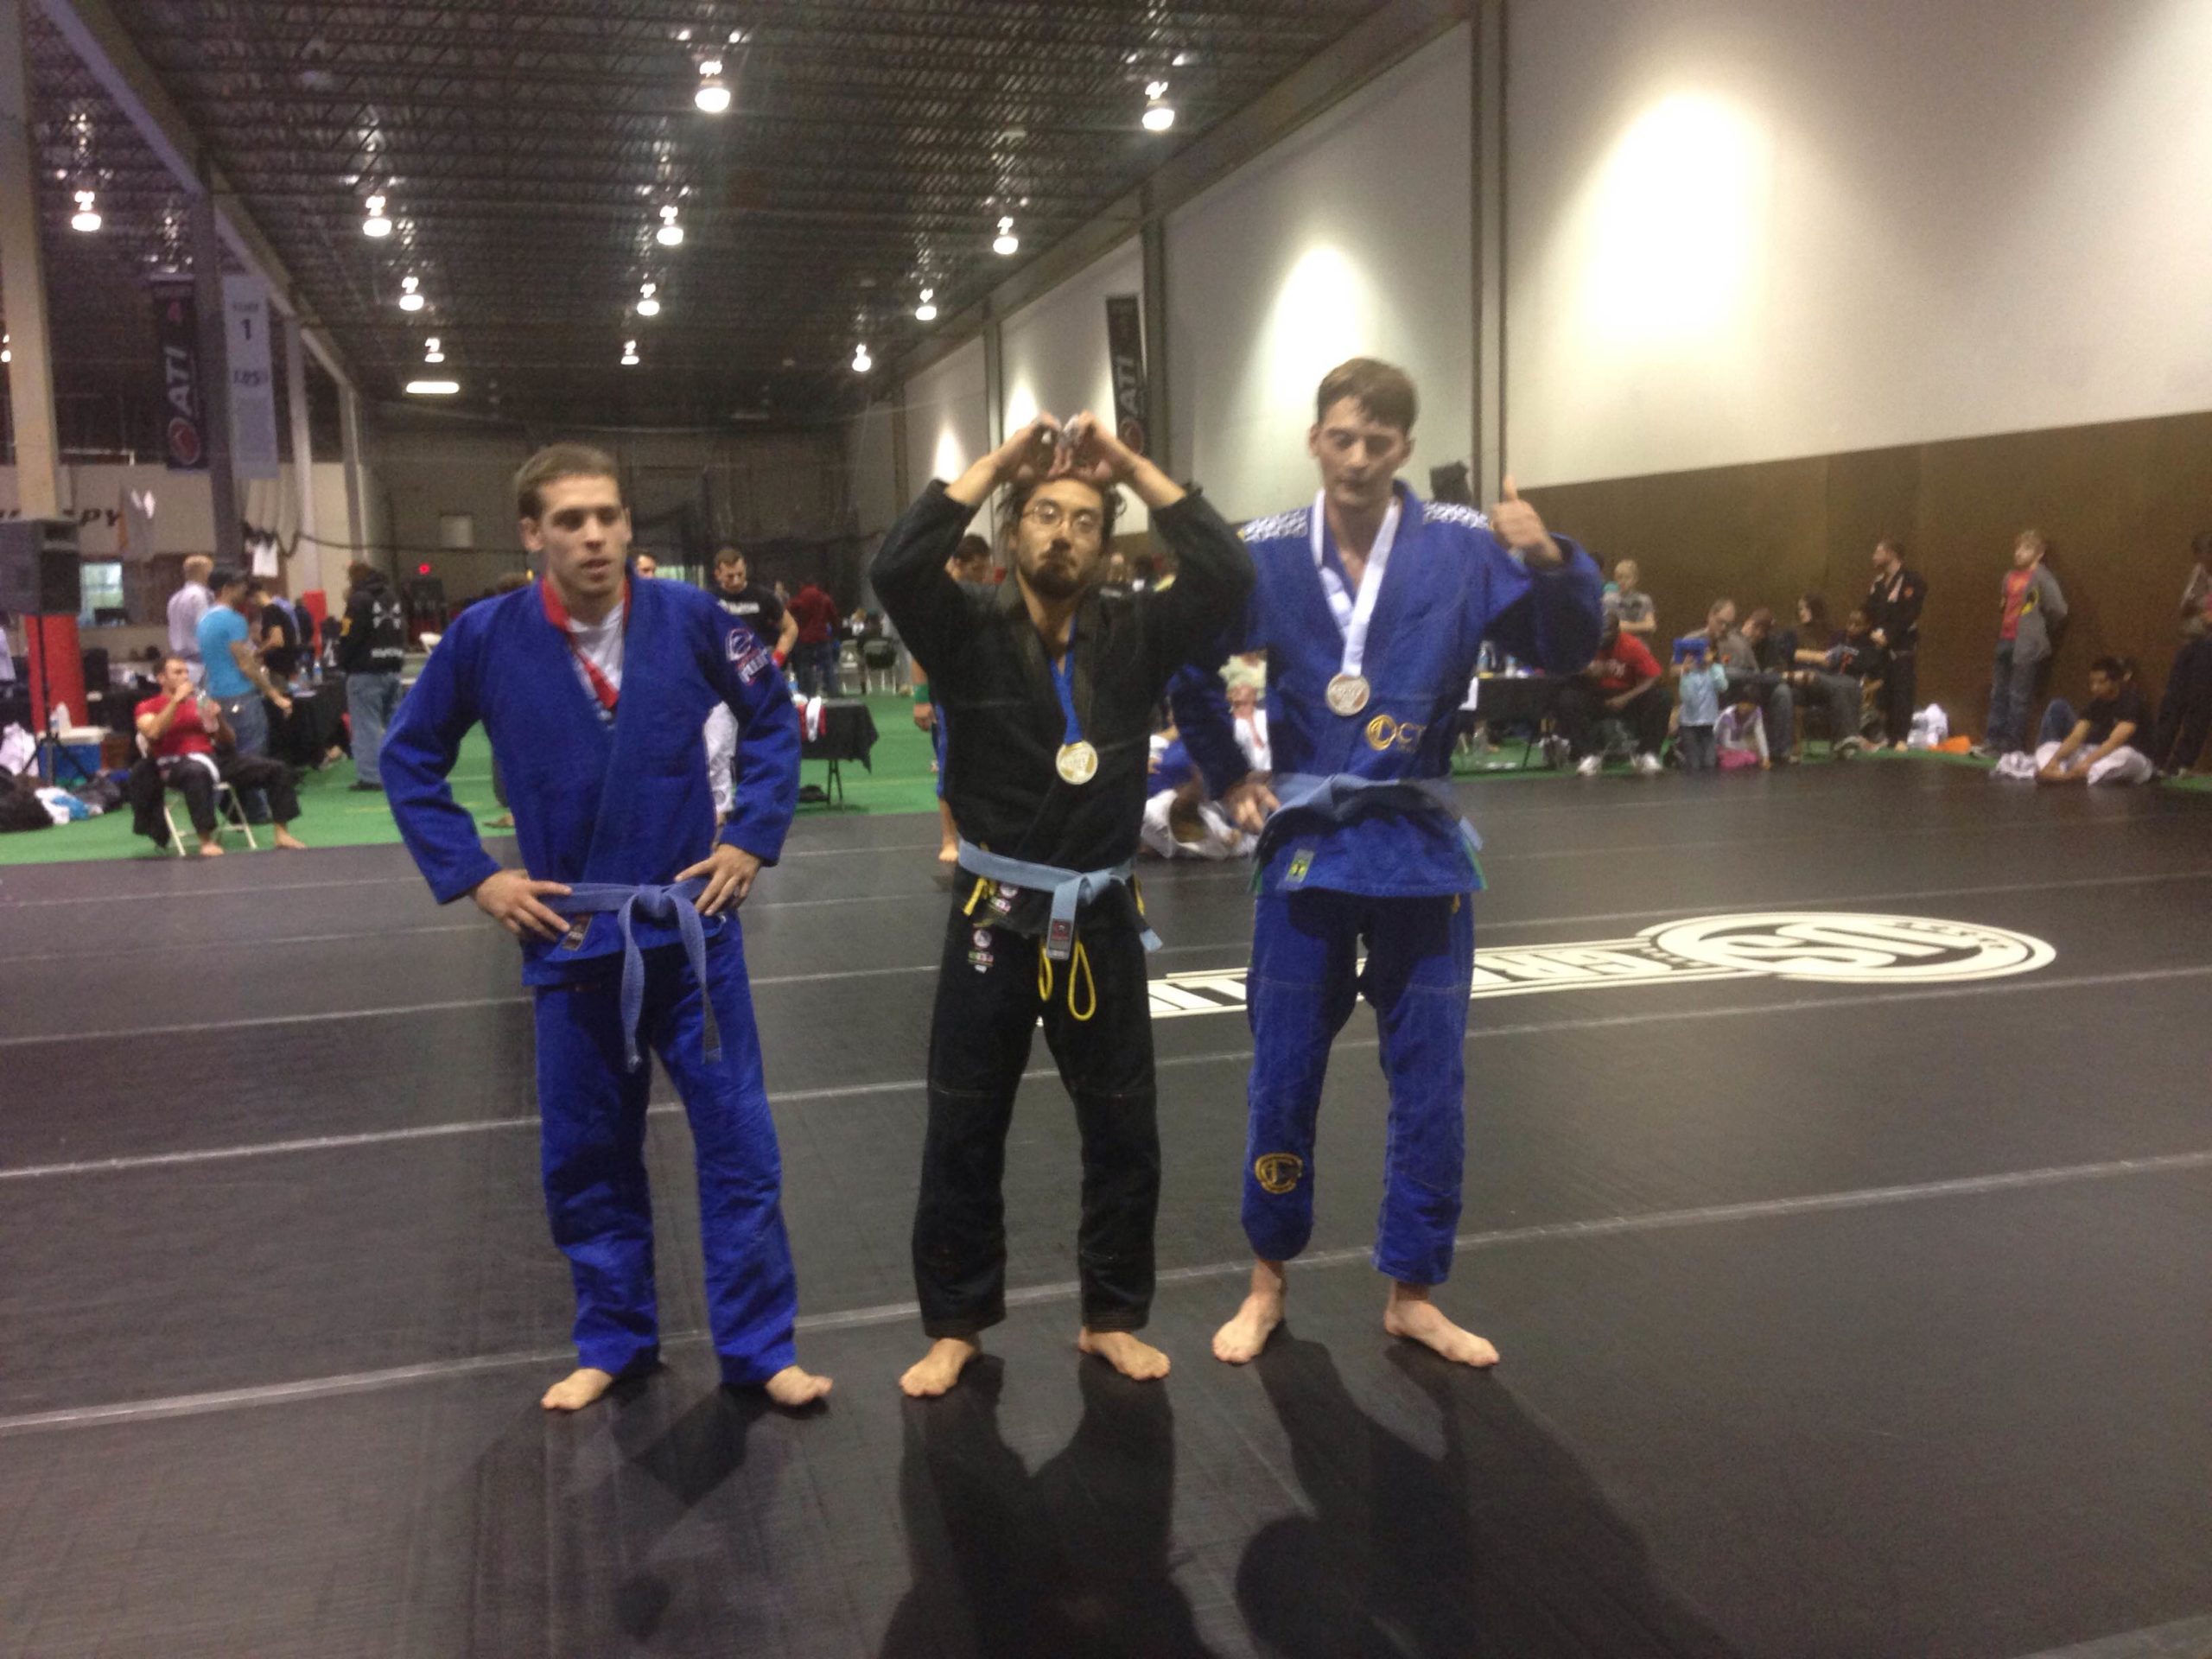 Chris Kim submitted his way through the Blue Belt gi division.